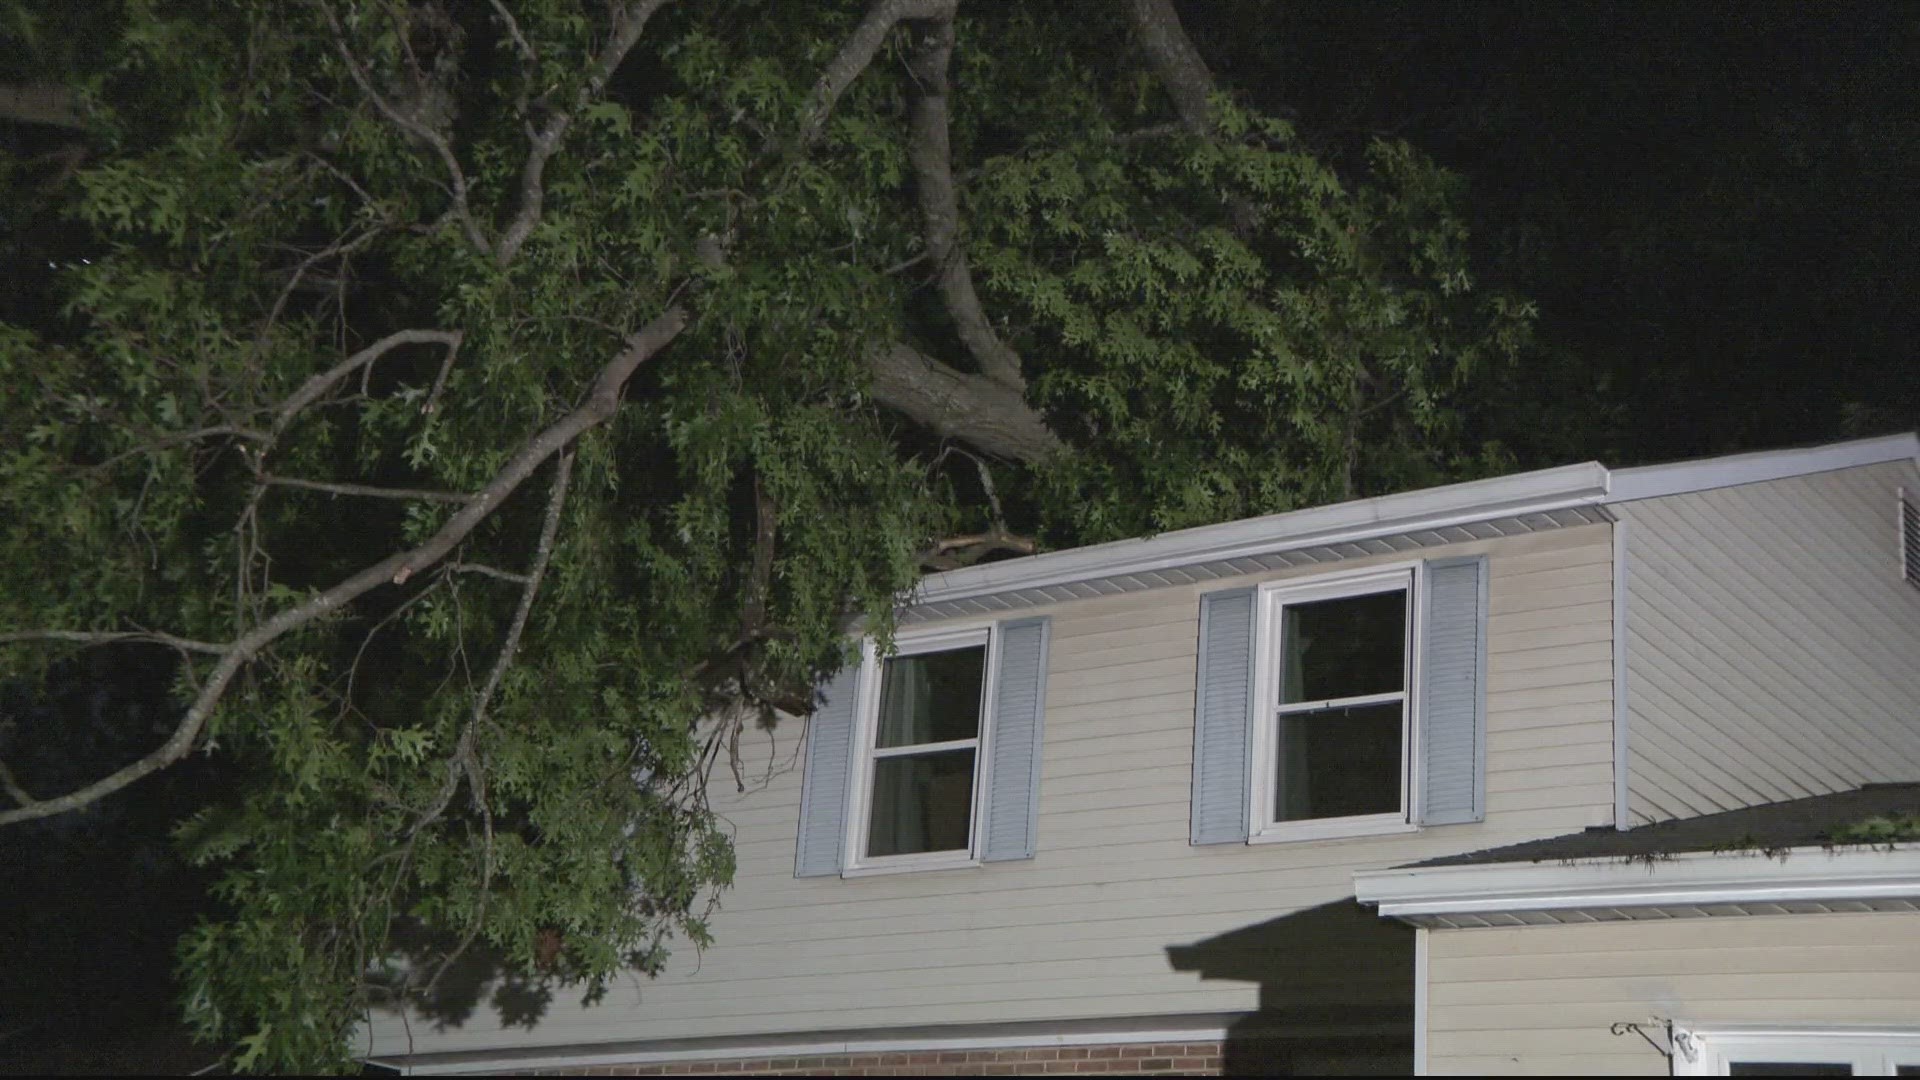 Authorities from Prince William County are investigating a death that could be storm related.